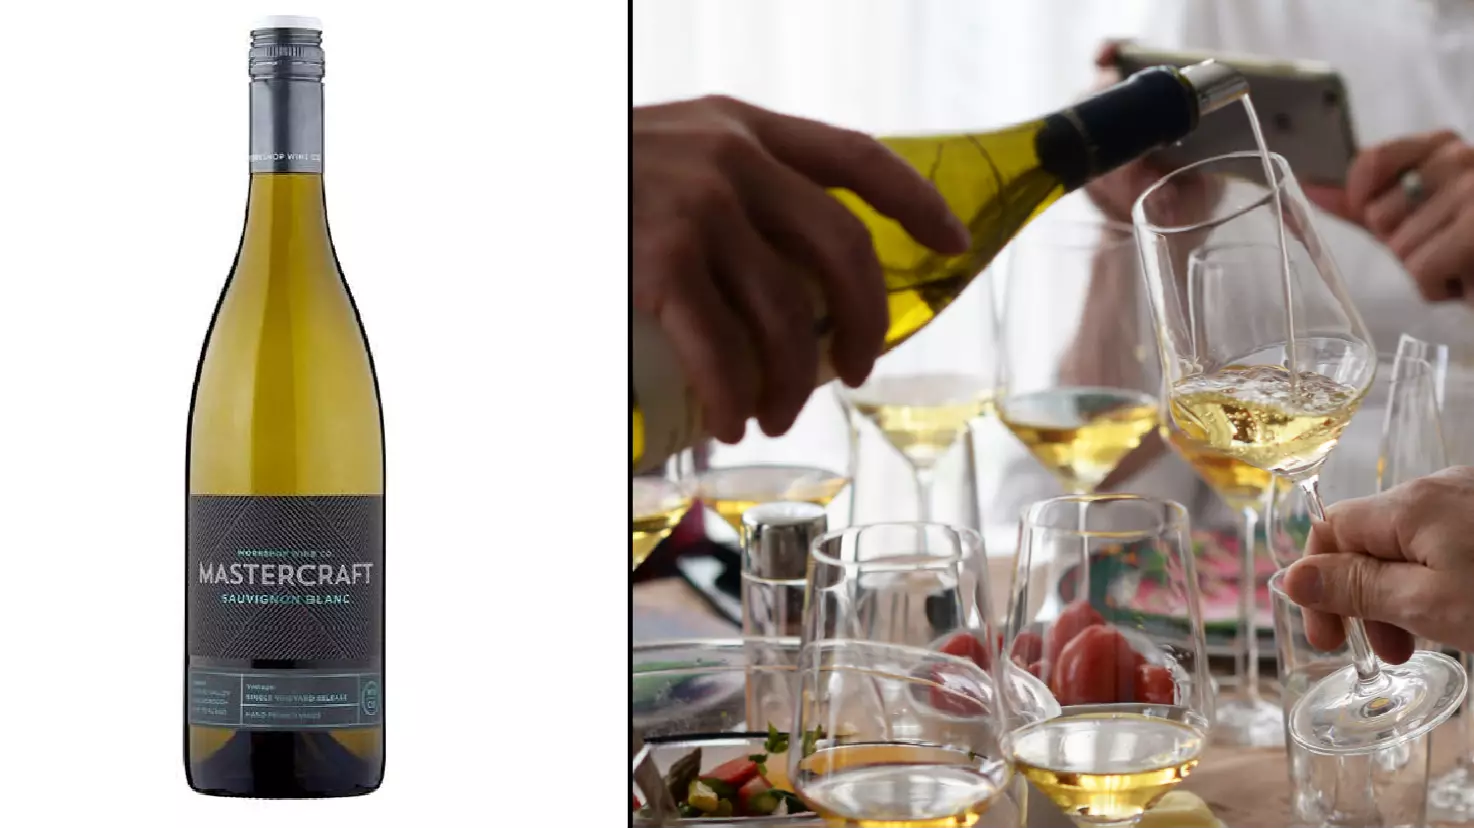 The Best Supermarket Wine In The World Will Cost You £7 From Morrisons